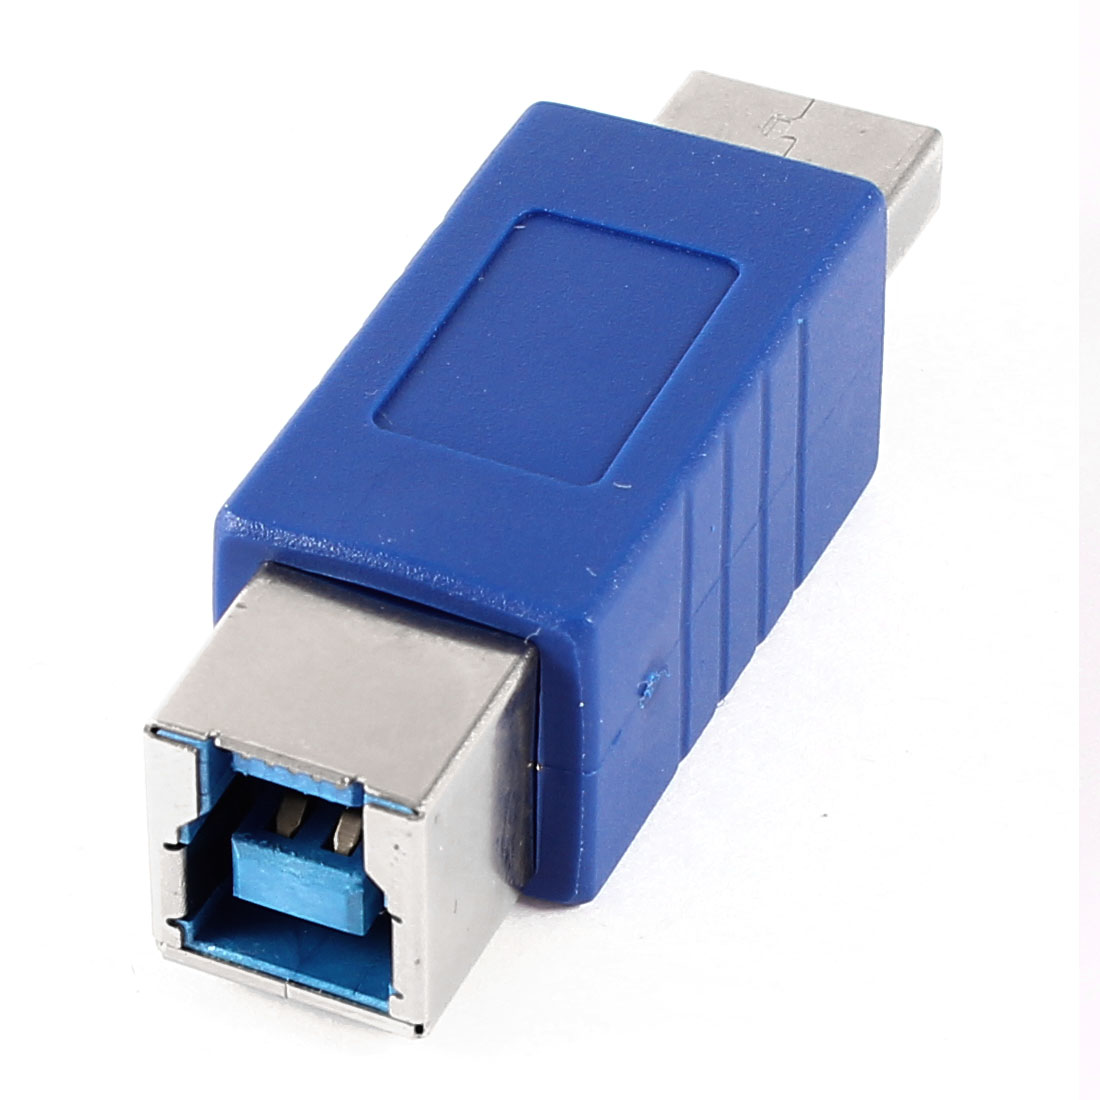 A-USB3AM3BF: USB 3.0 A Male to B Female Adapter - Blue